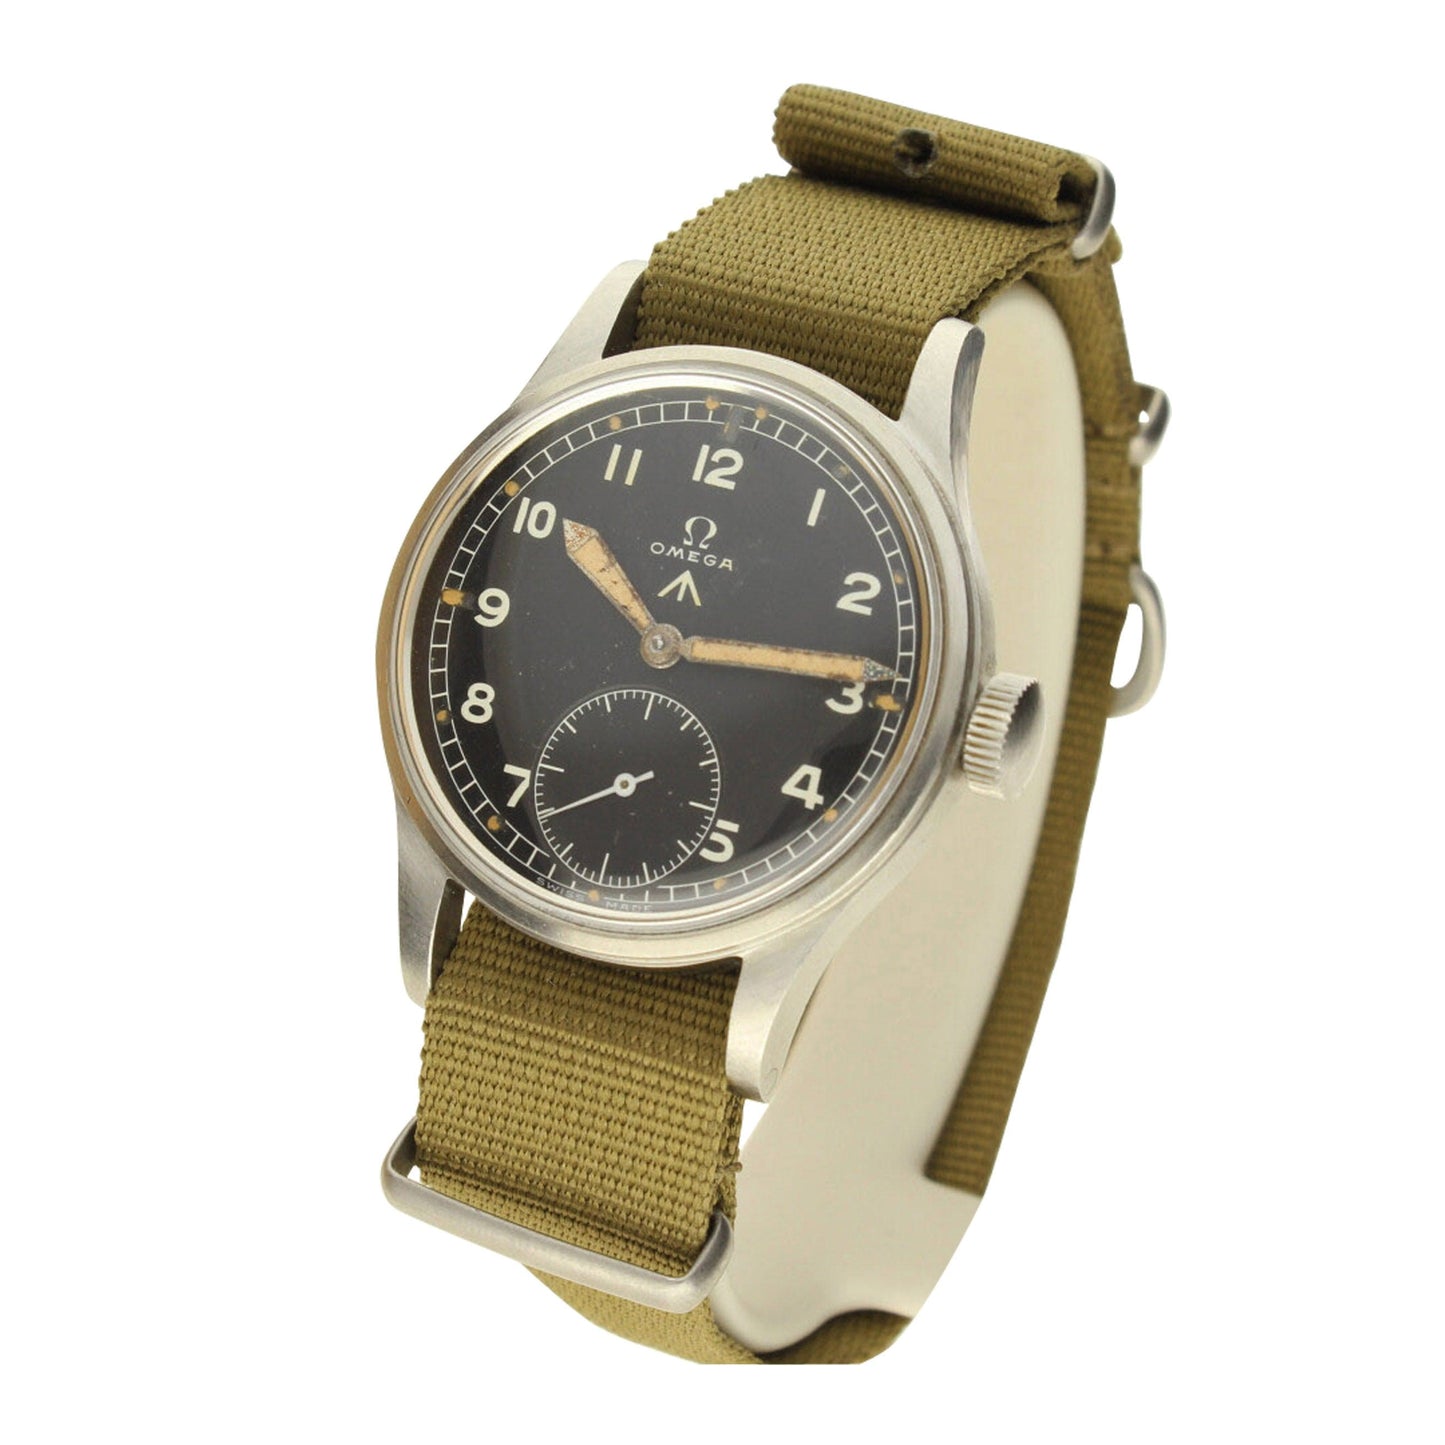 Stainless steel British military watch, part of the "Dirty dozen". Made 1945